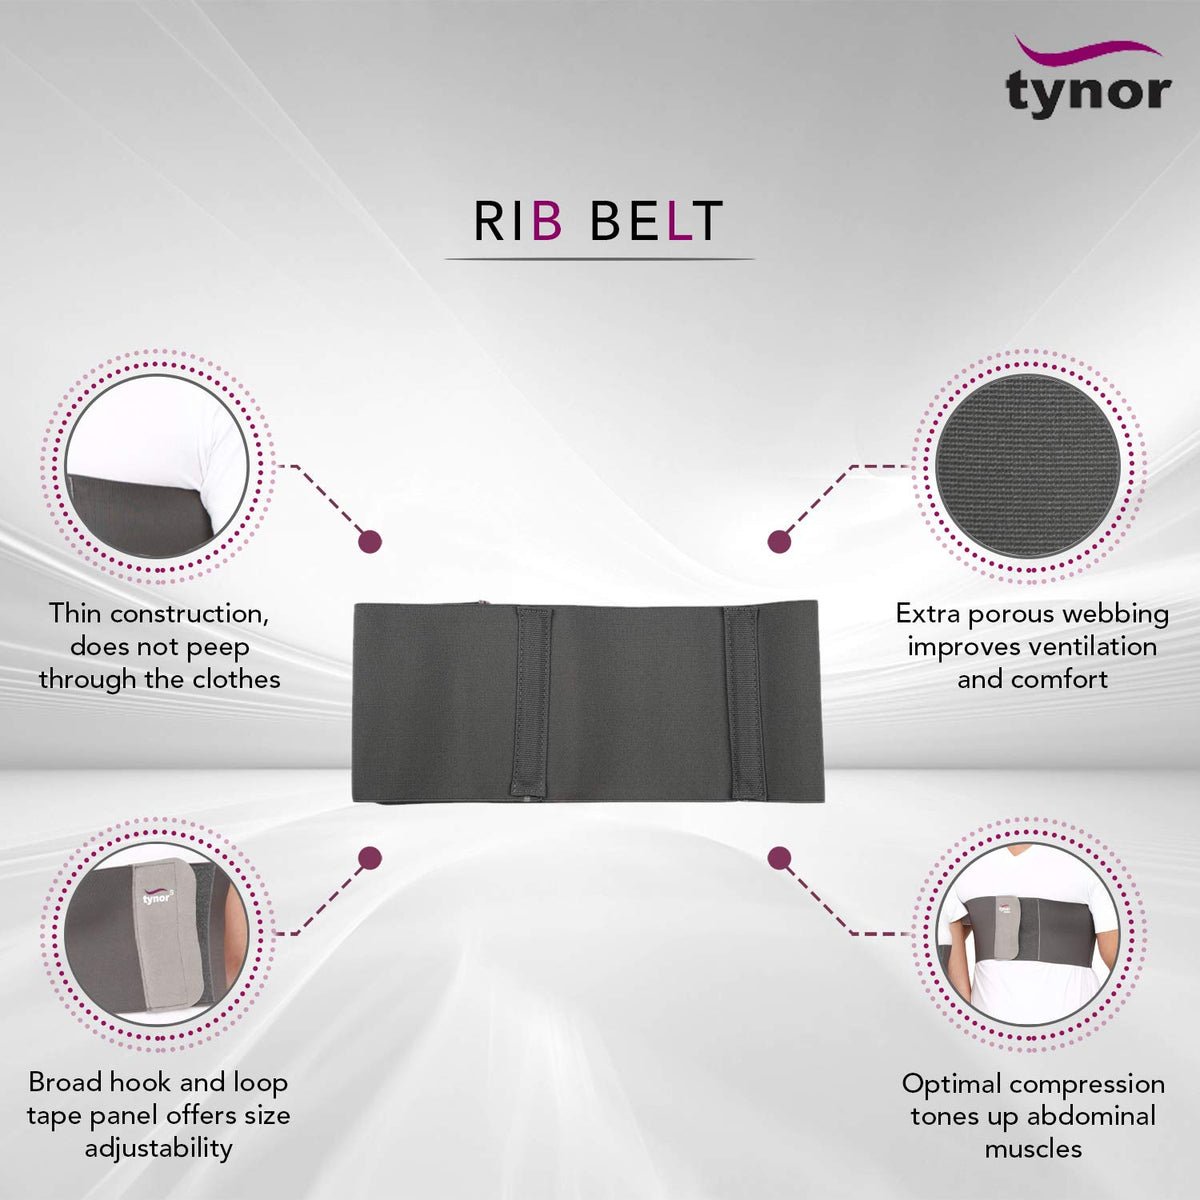 Rib Belt Body Belts for Abdominal and Rib Injuries and fracture-7